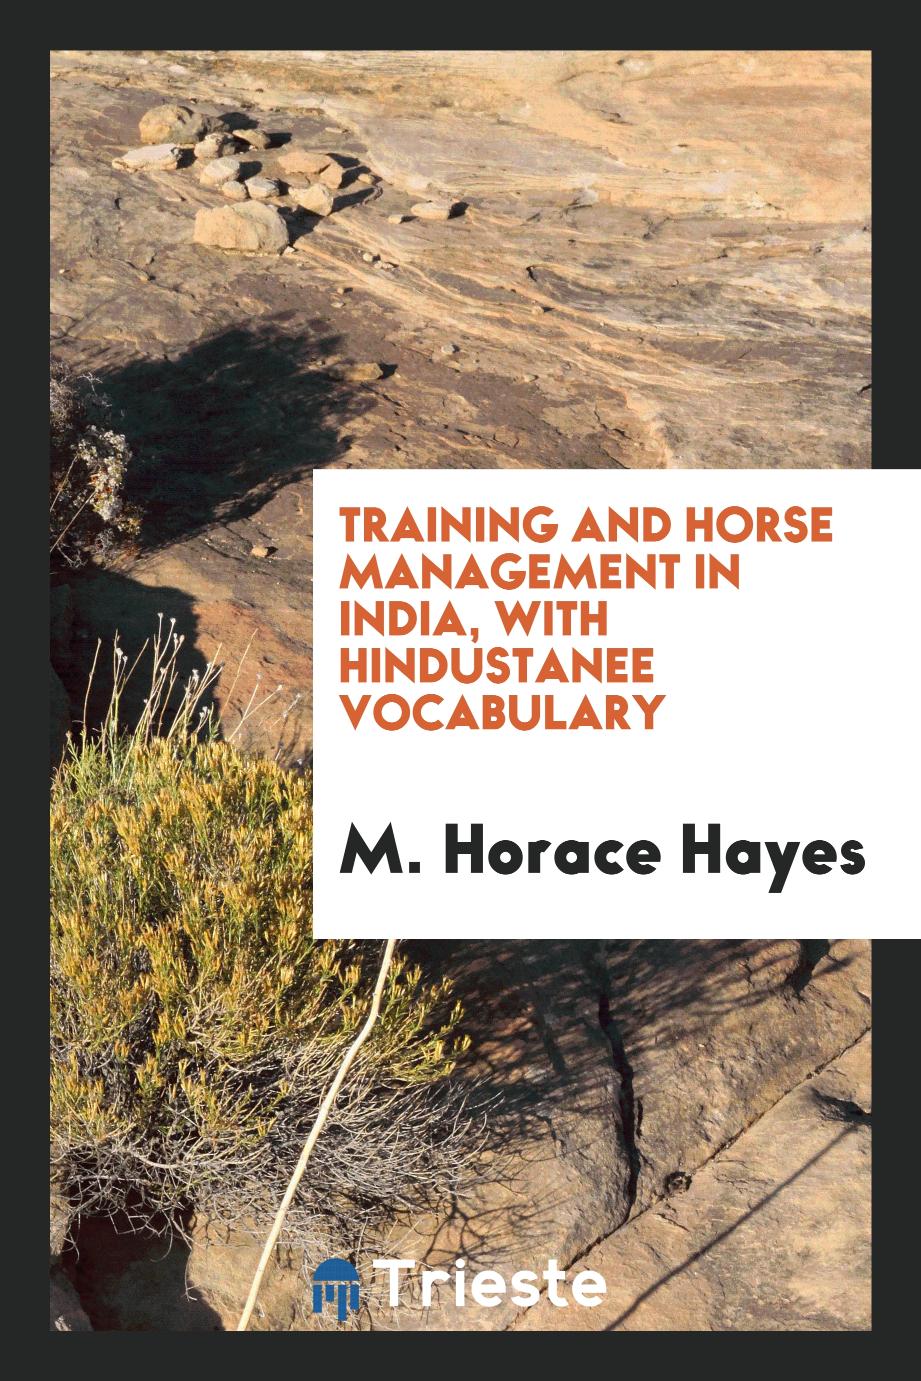 Training and horse management in India, with Hindustanee vocabulary